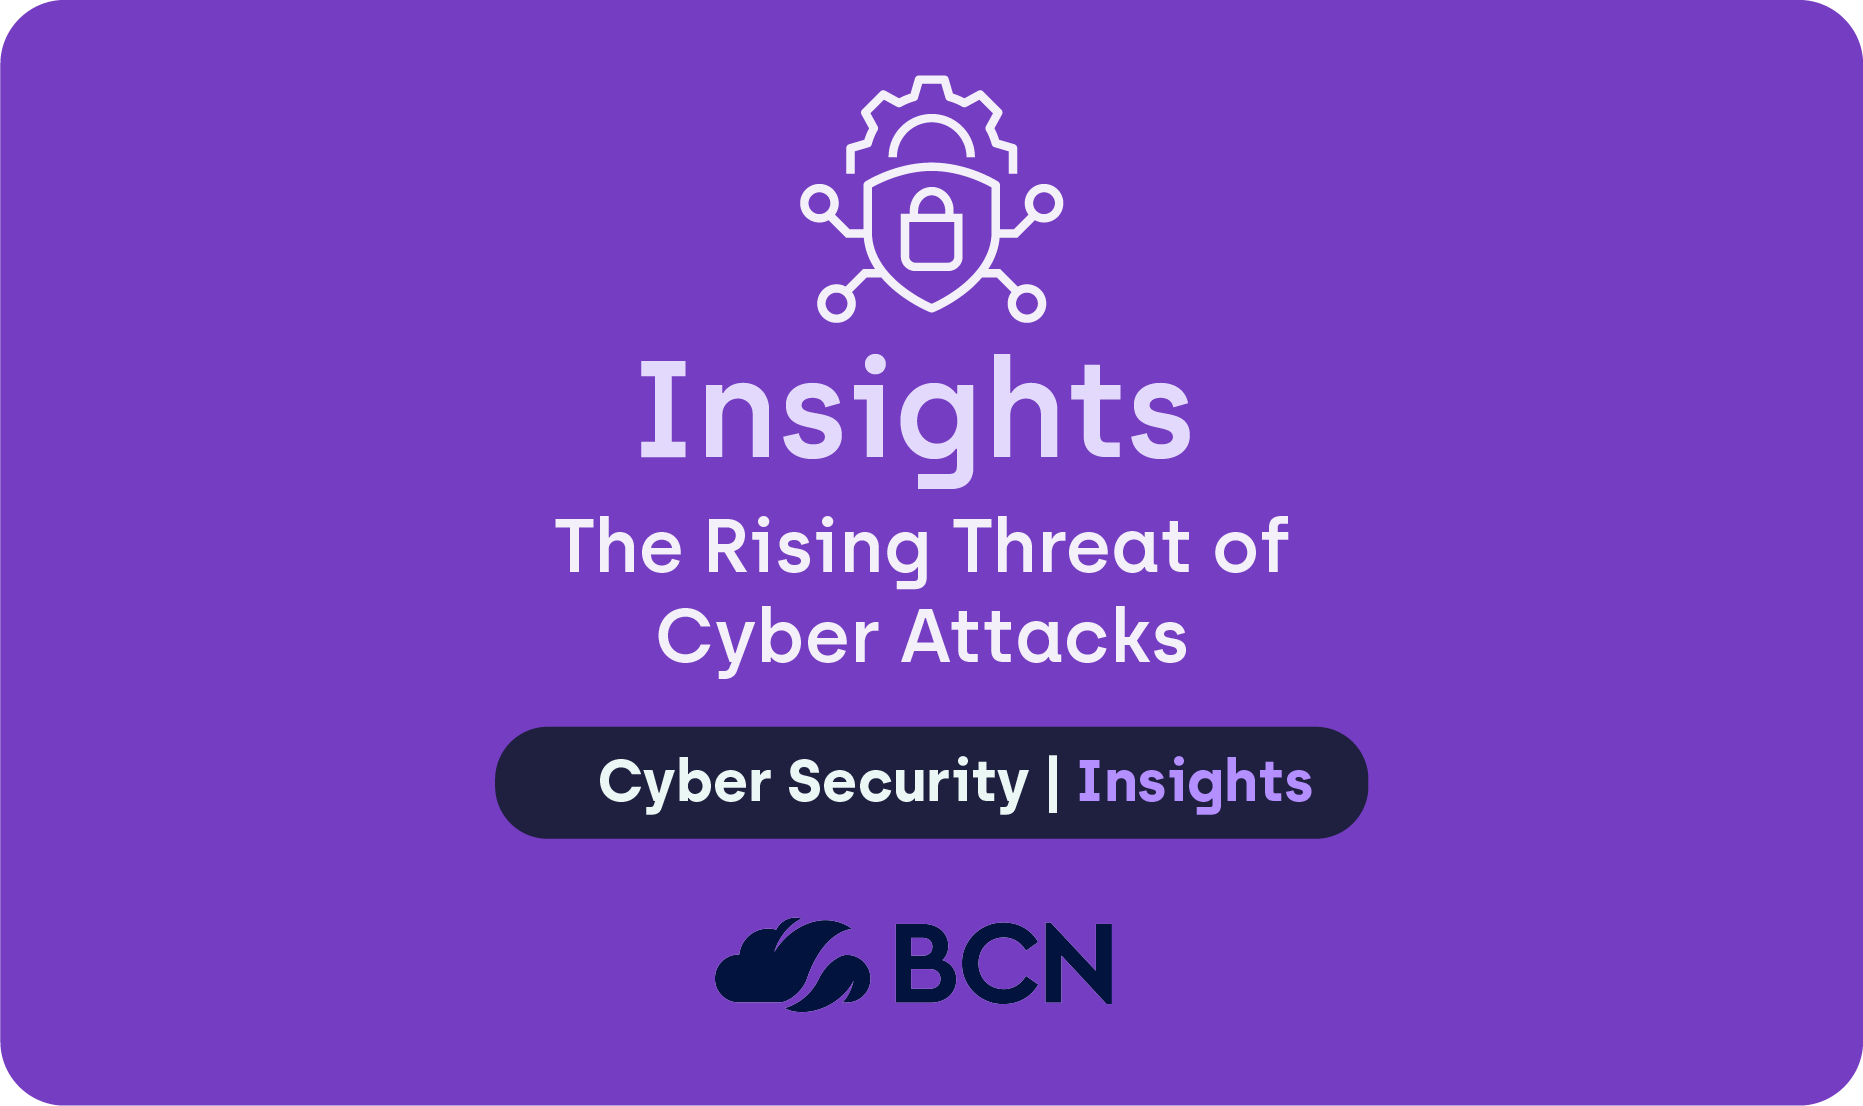 The Rising Threat of Cyber-Attacks